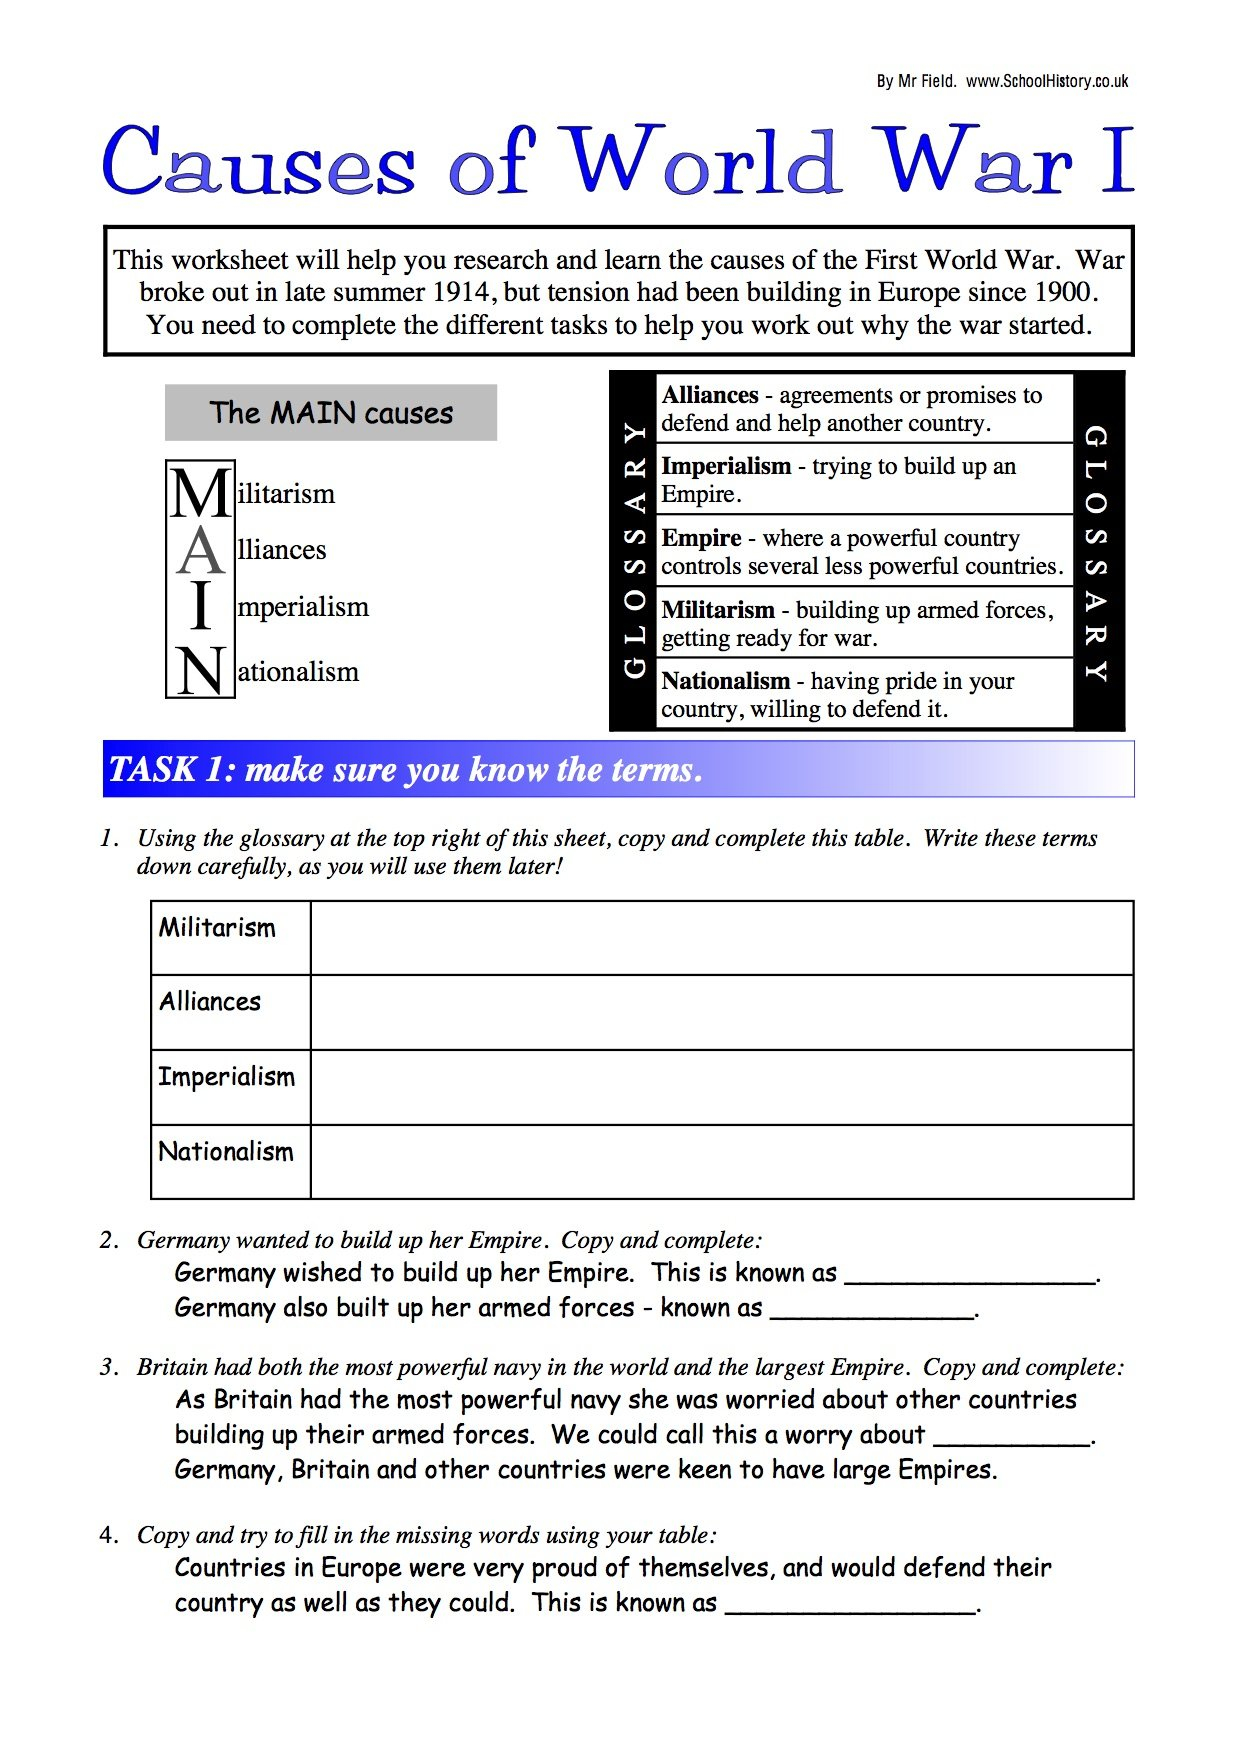 003 World War One Causes Essay Amusing History Worksheets On About As Well As Causes Of World War 1 Worksheet